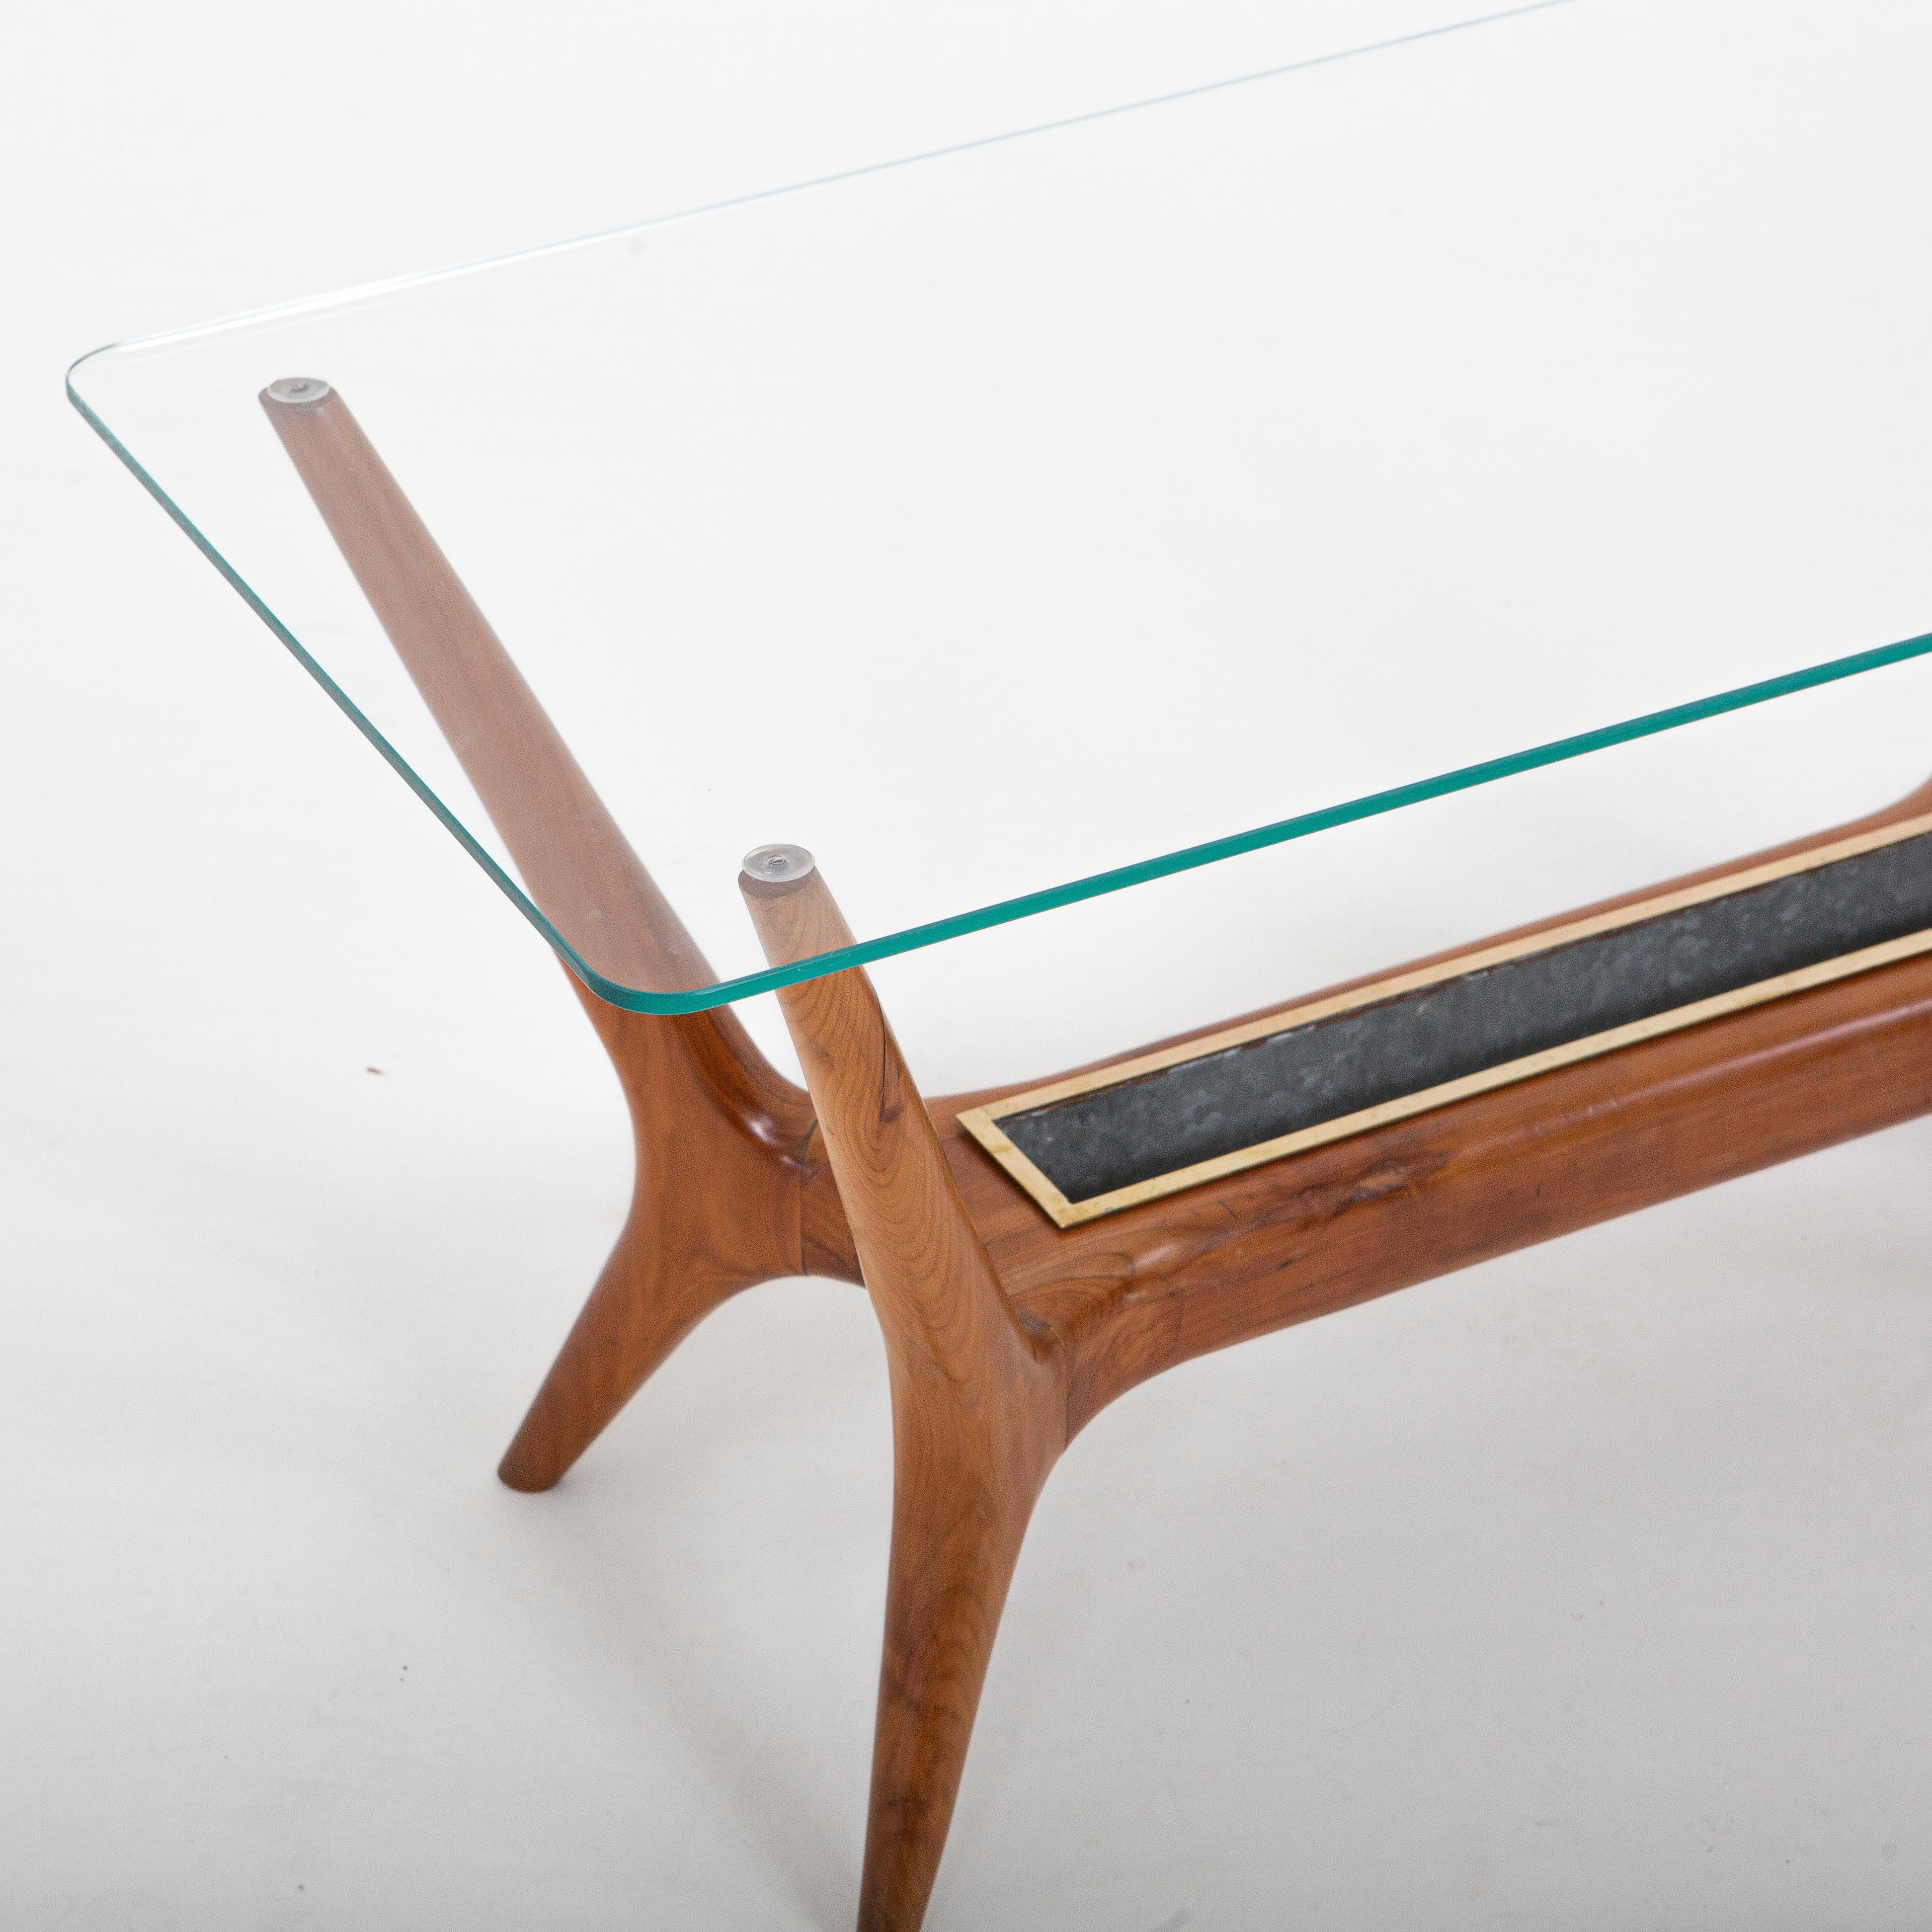 Italian Modernist Cocktail Table Attributed to Gio Ponti For Sale 4